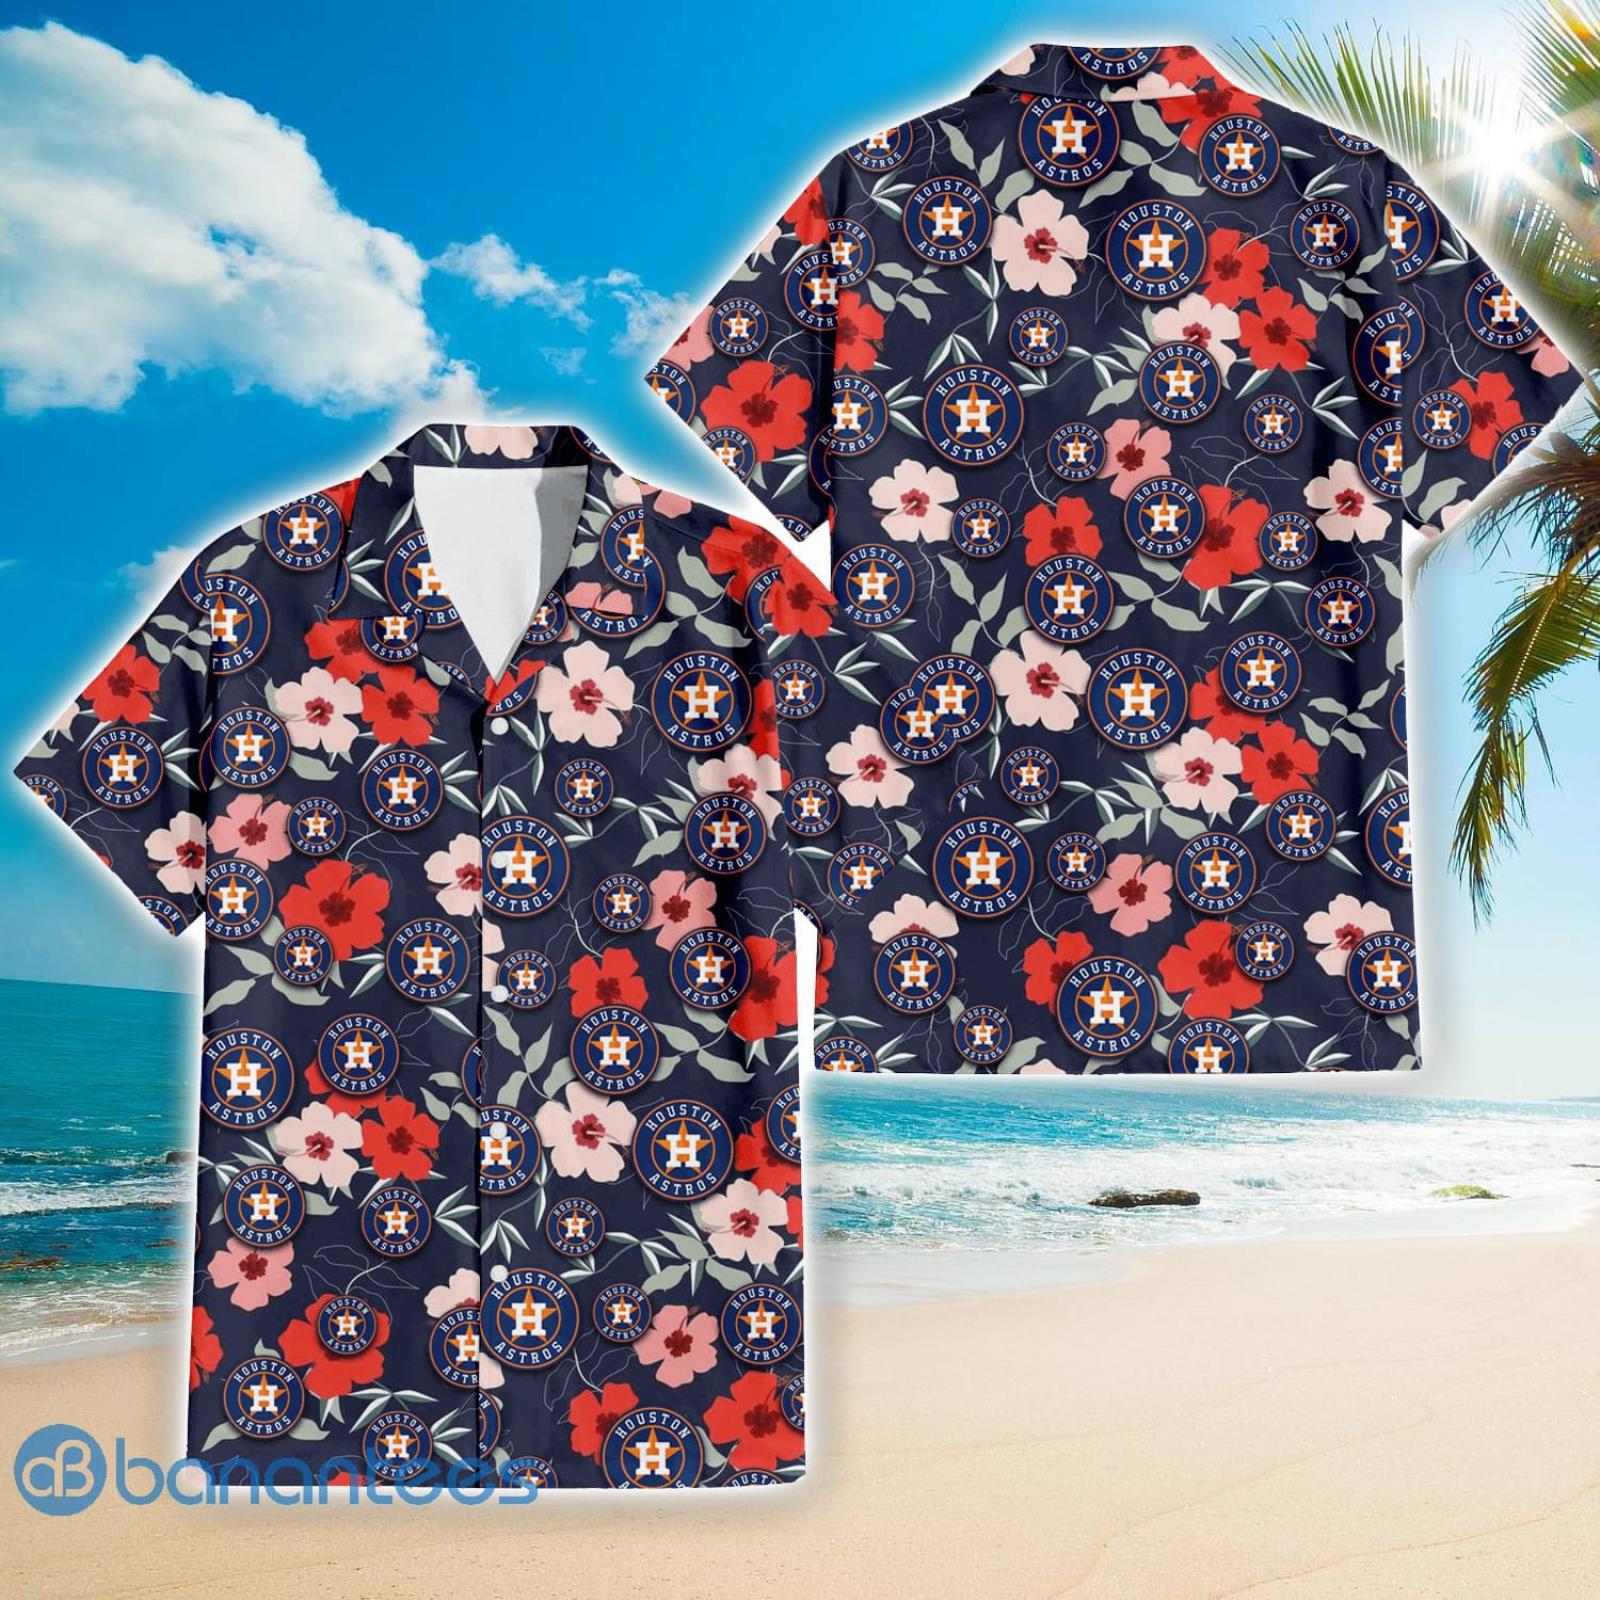 Houston Astros Small Pink Hibiscus Pattern All Over Printed 3D Hawaiian  Shirt